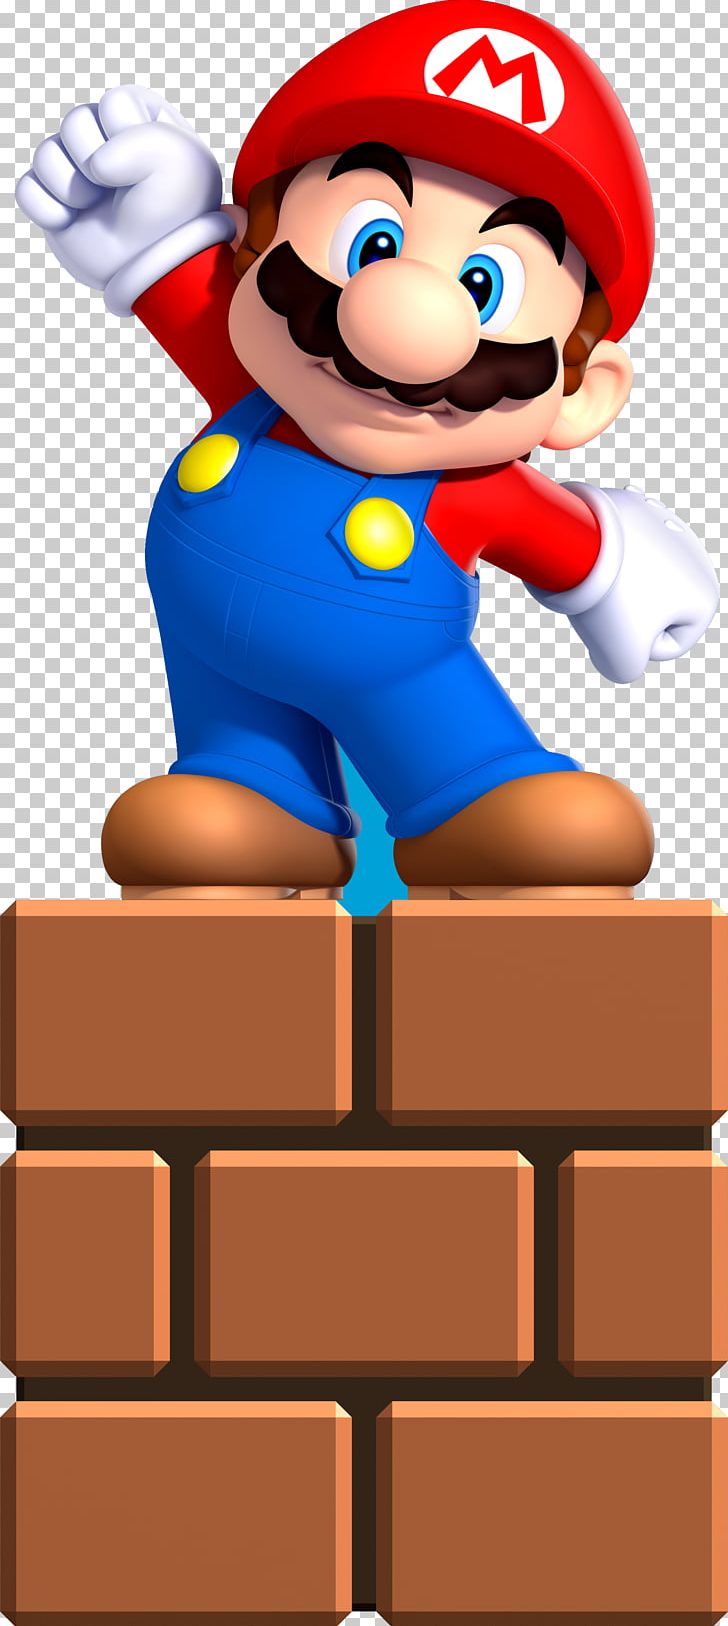 New Super Mario Bros. U New Super Mario Bros. U PNG, Clipart, Cartoon, Fictional Character, Finger, Gaming, Hand Free PNG Download